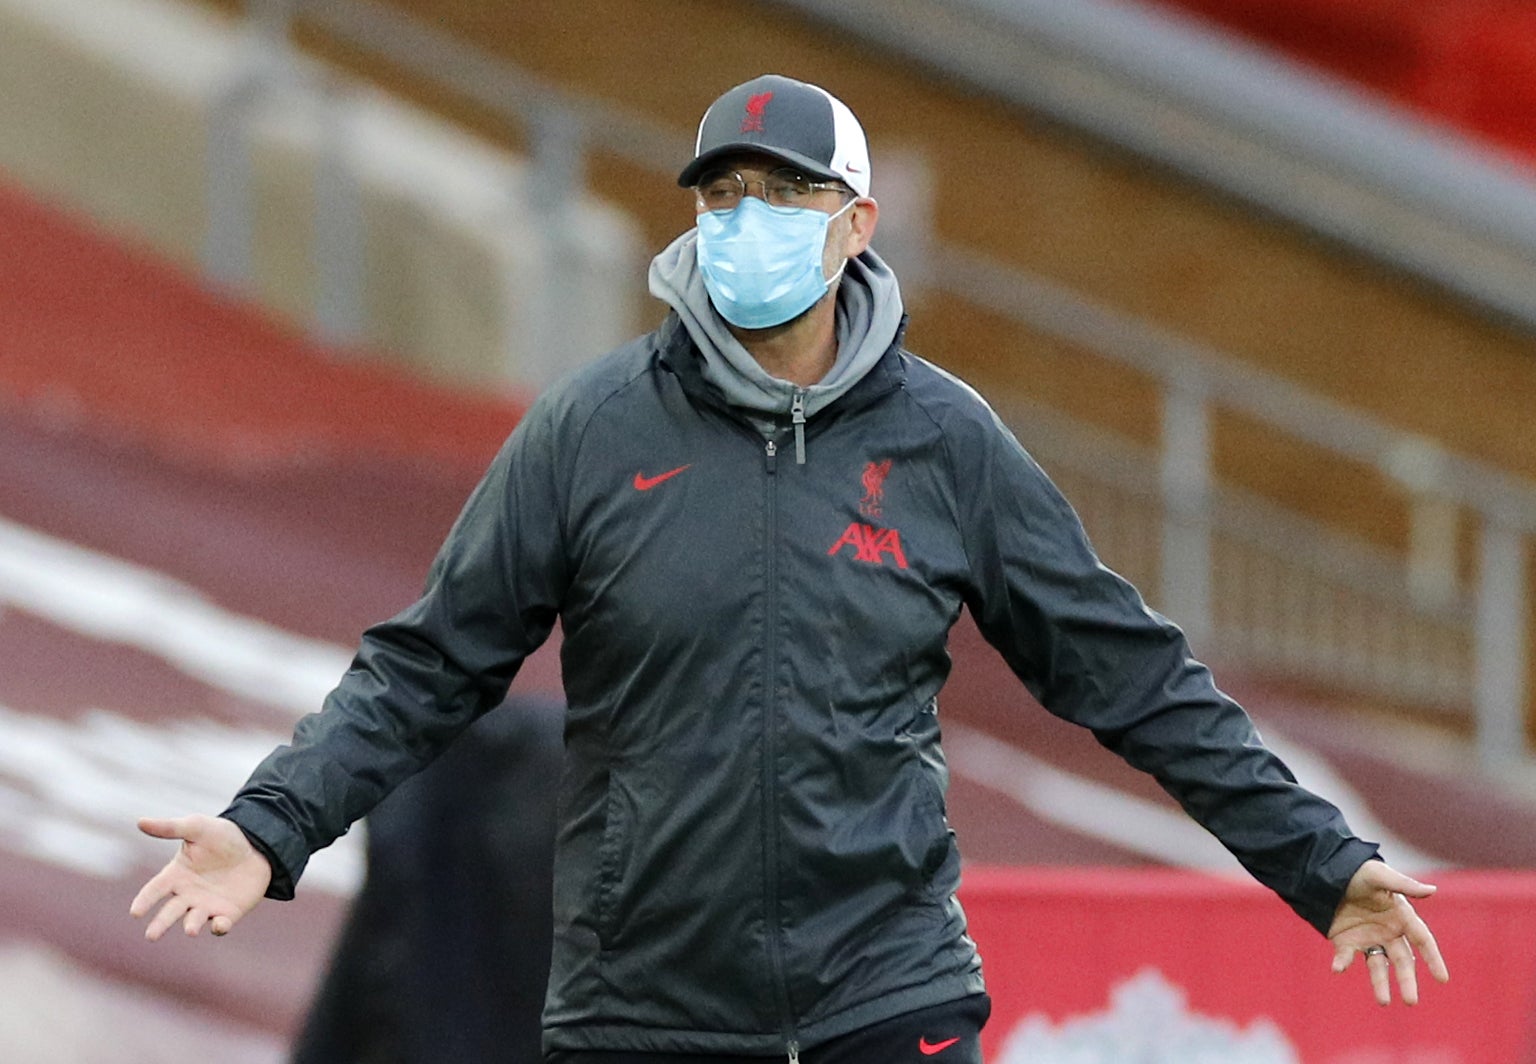 Jurgen Klopp has urged people to get vaccinated (Phil Noble/PA)